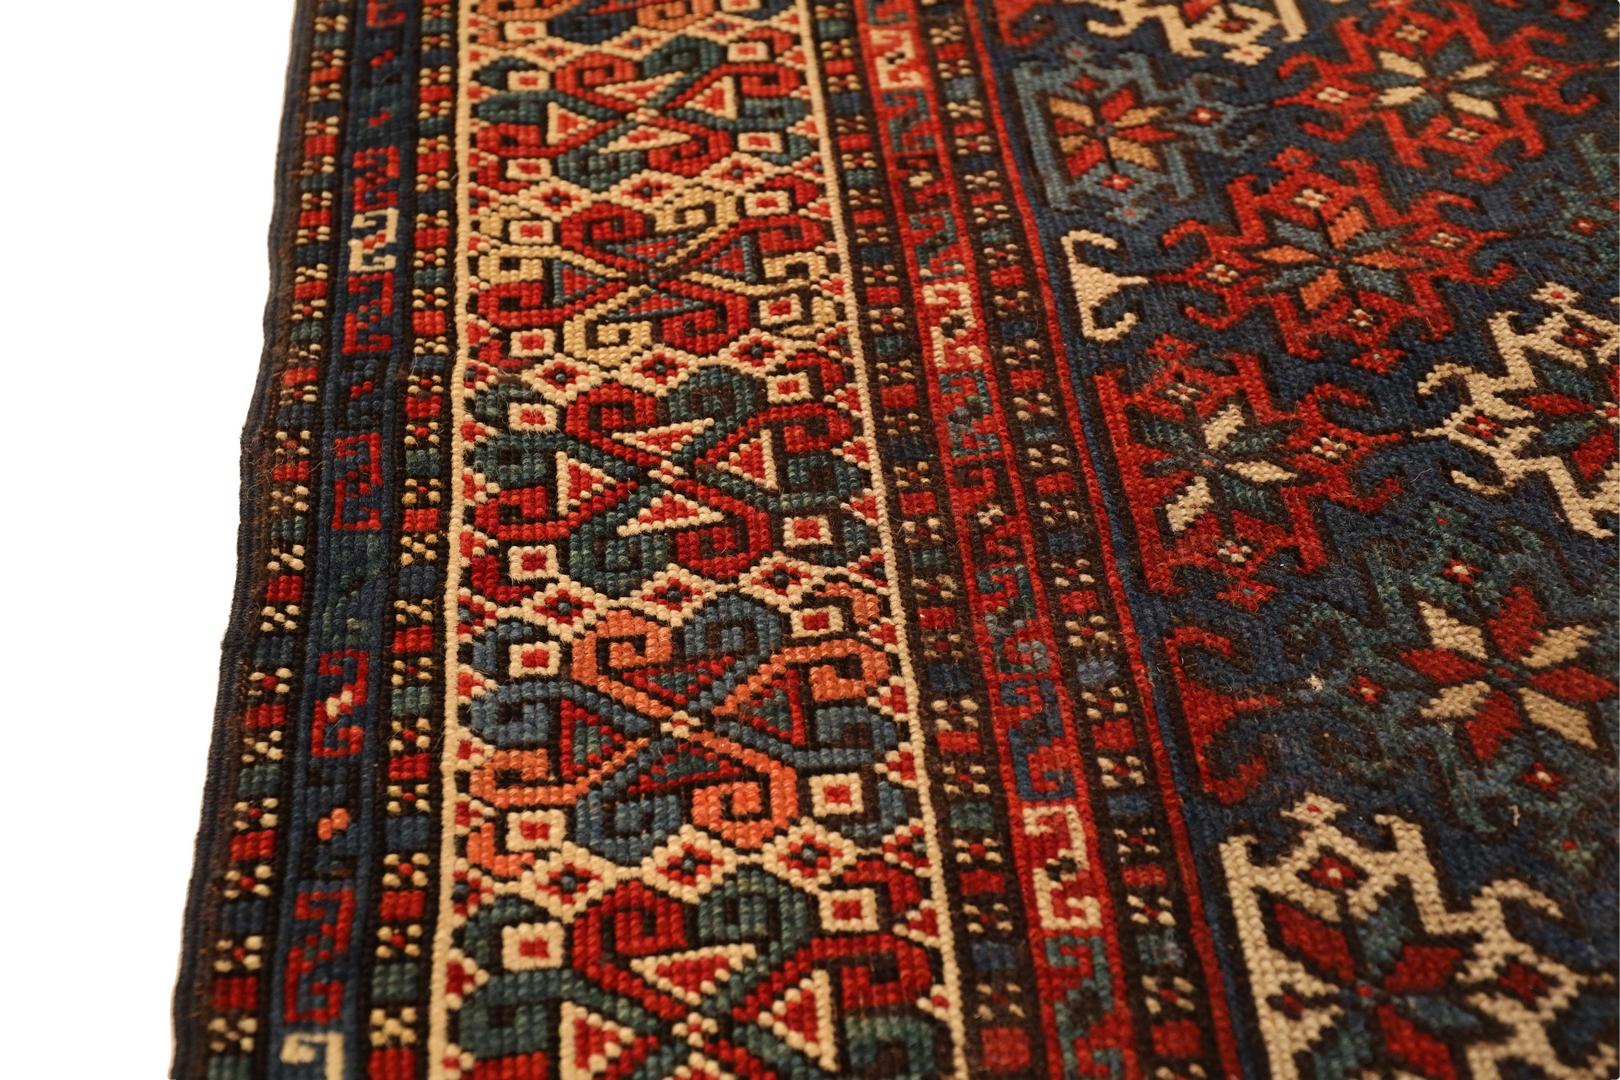 Hand-Knotted Caucasian Antique Rug, Blue Red Ivory - 3 x 5 For Sale